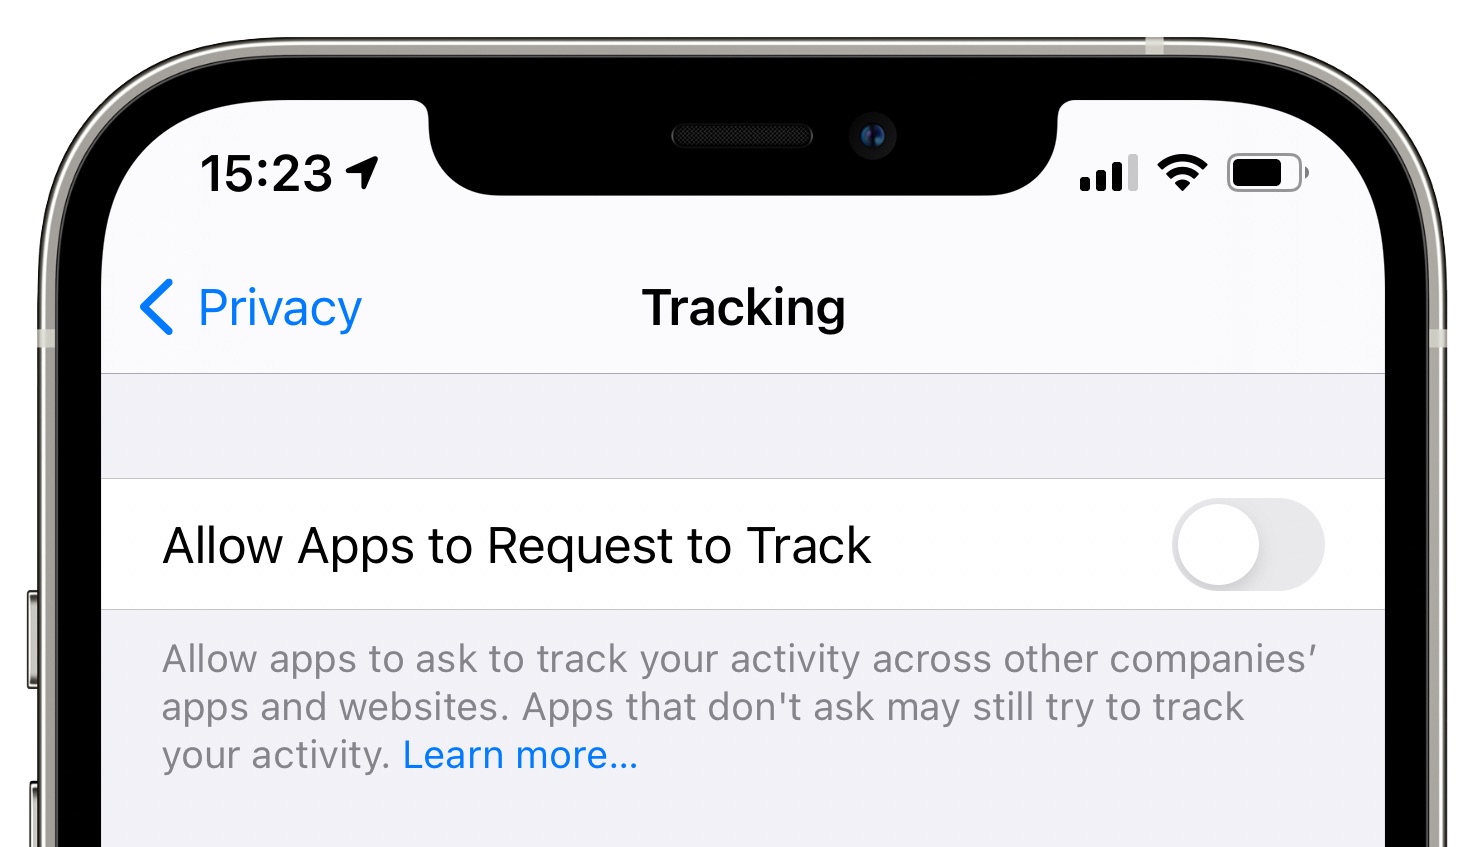 A screenshot of the Settings app in iOS 14.5 showing the option "Allow Apps to Request to Track" as turned off